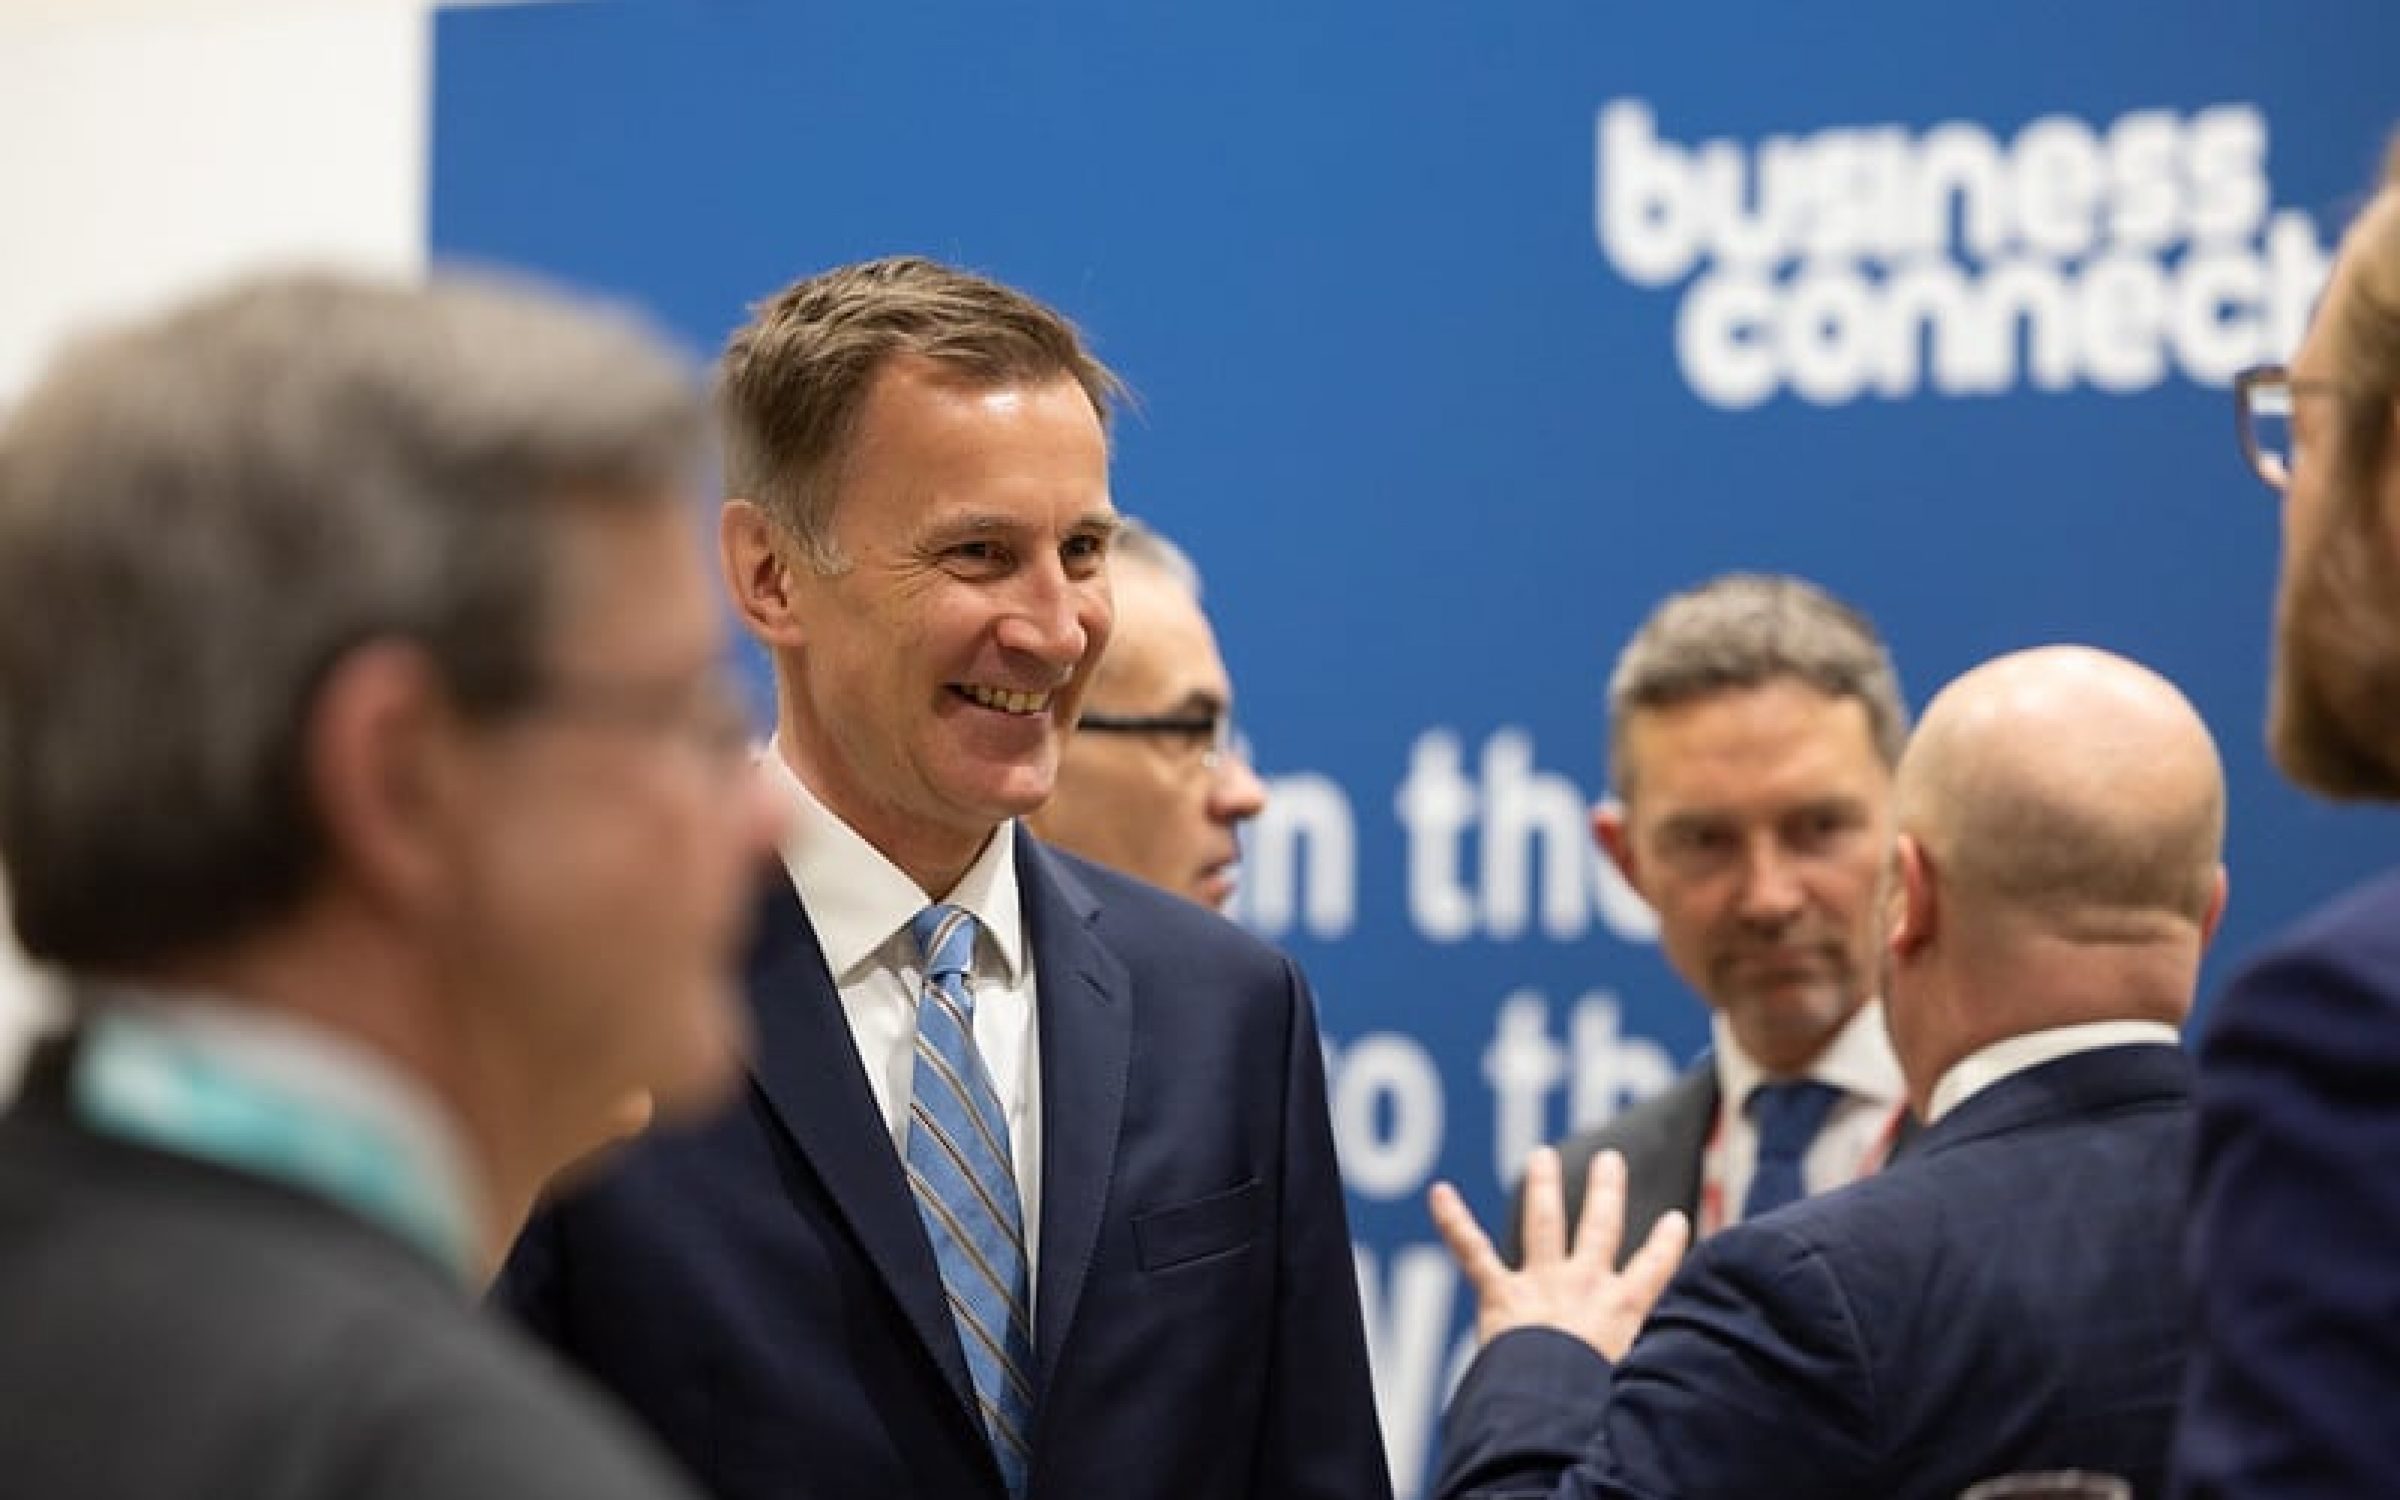 Chancellor Jeremy Hunt, who faces pressure from some Conservative MPs to bring in tax cuts